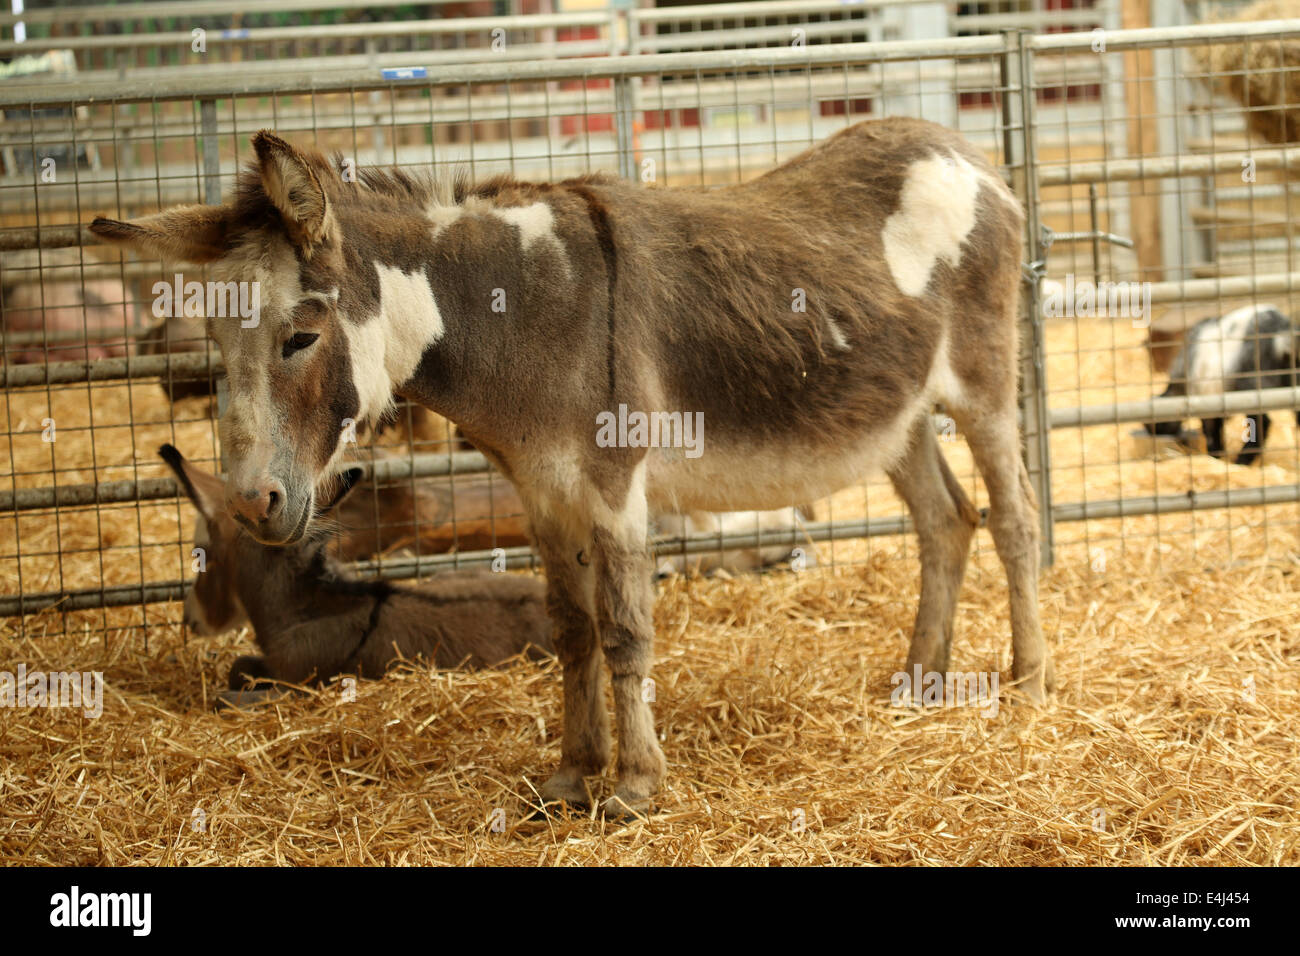 Baby donkey and mother, 2014 Stock Photo